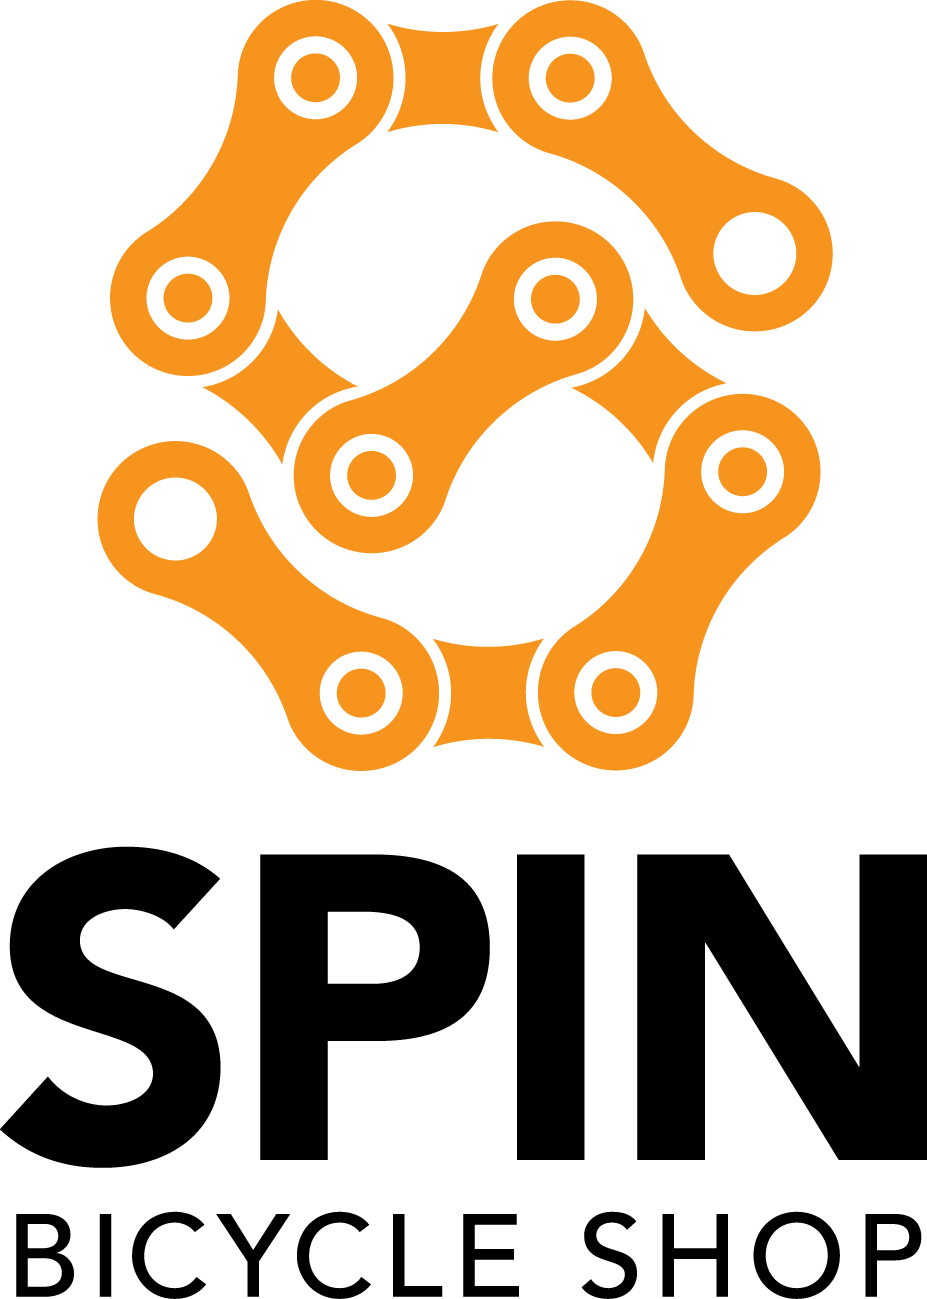 SPIN Bicycle Shop